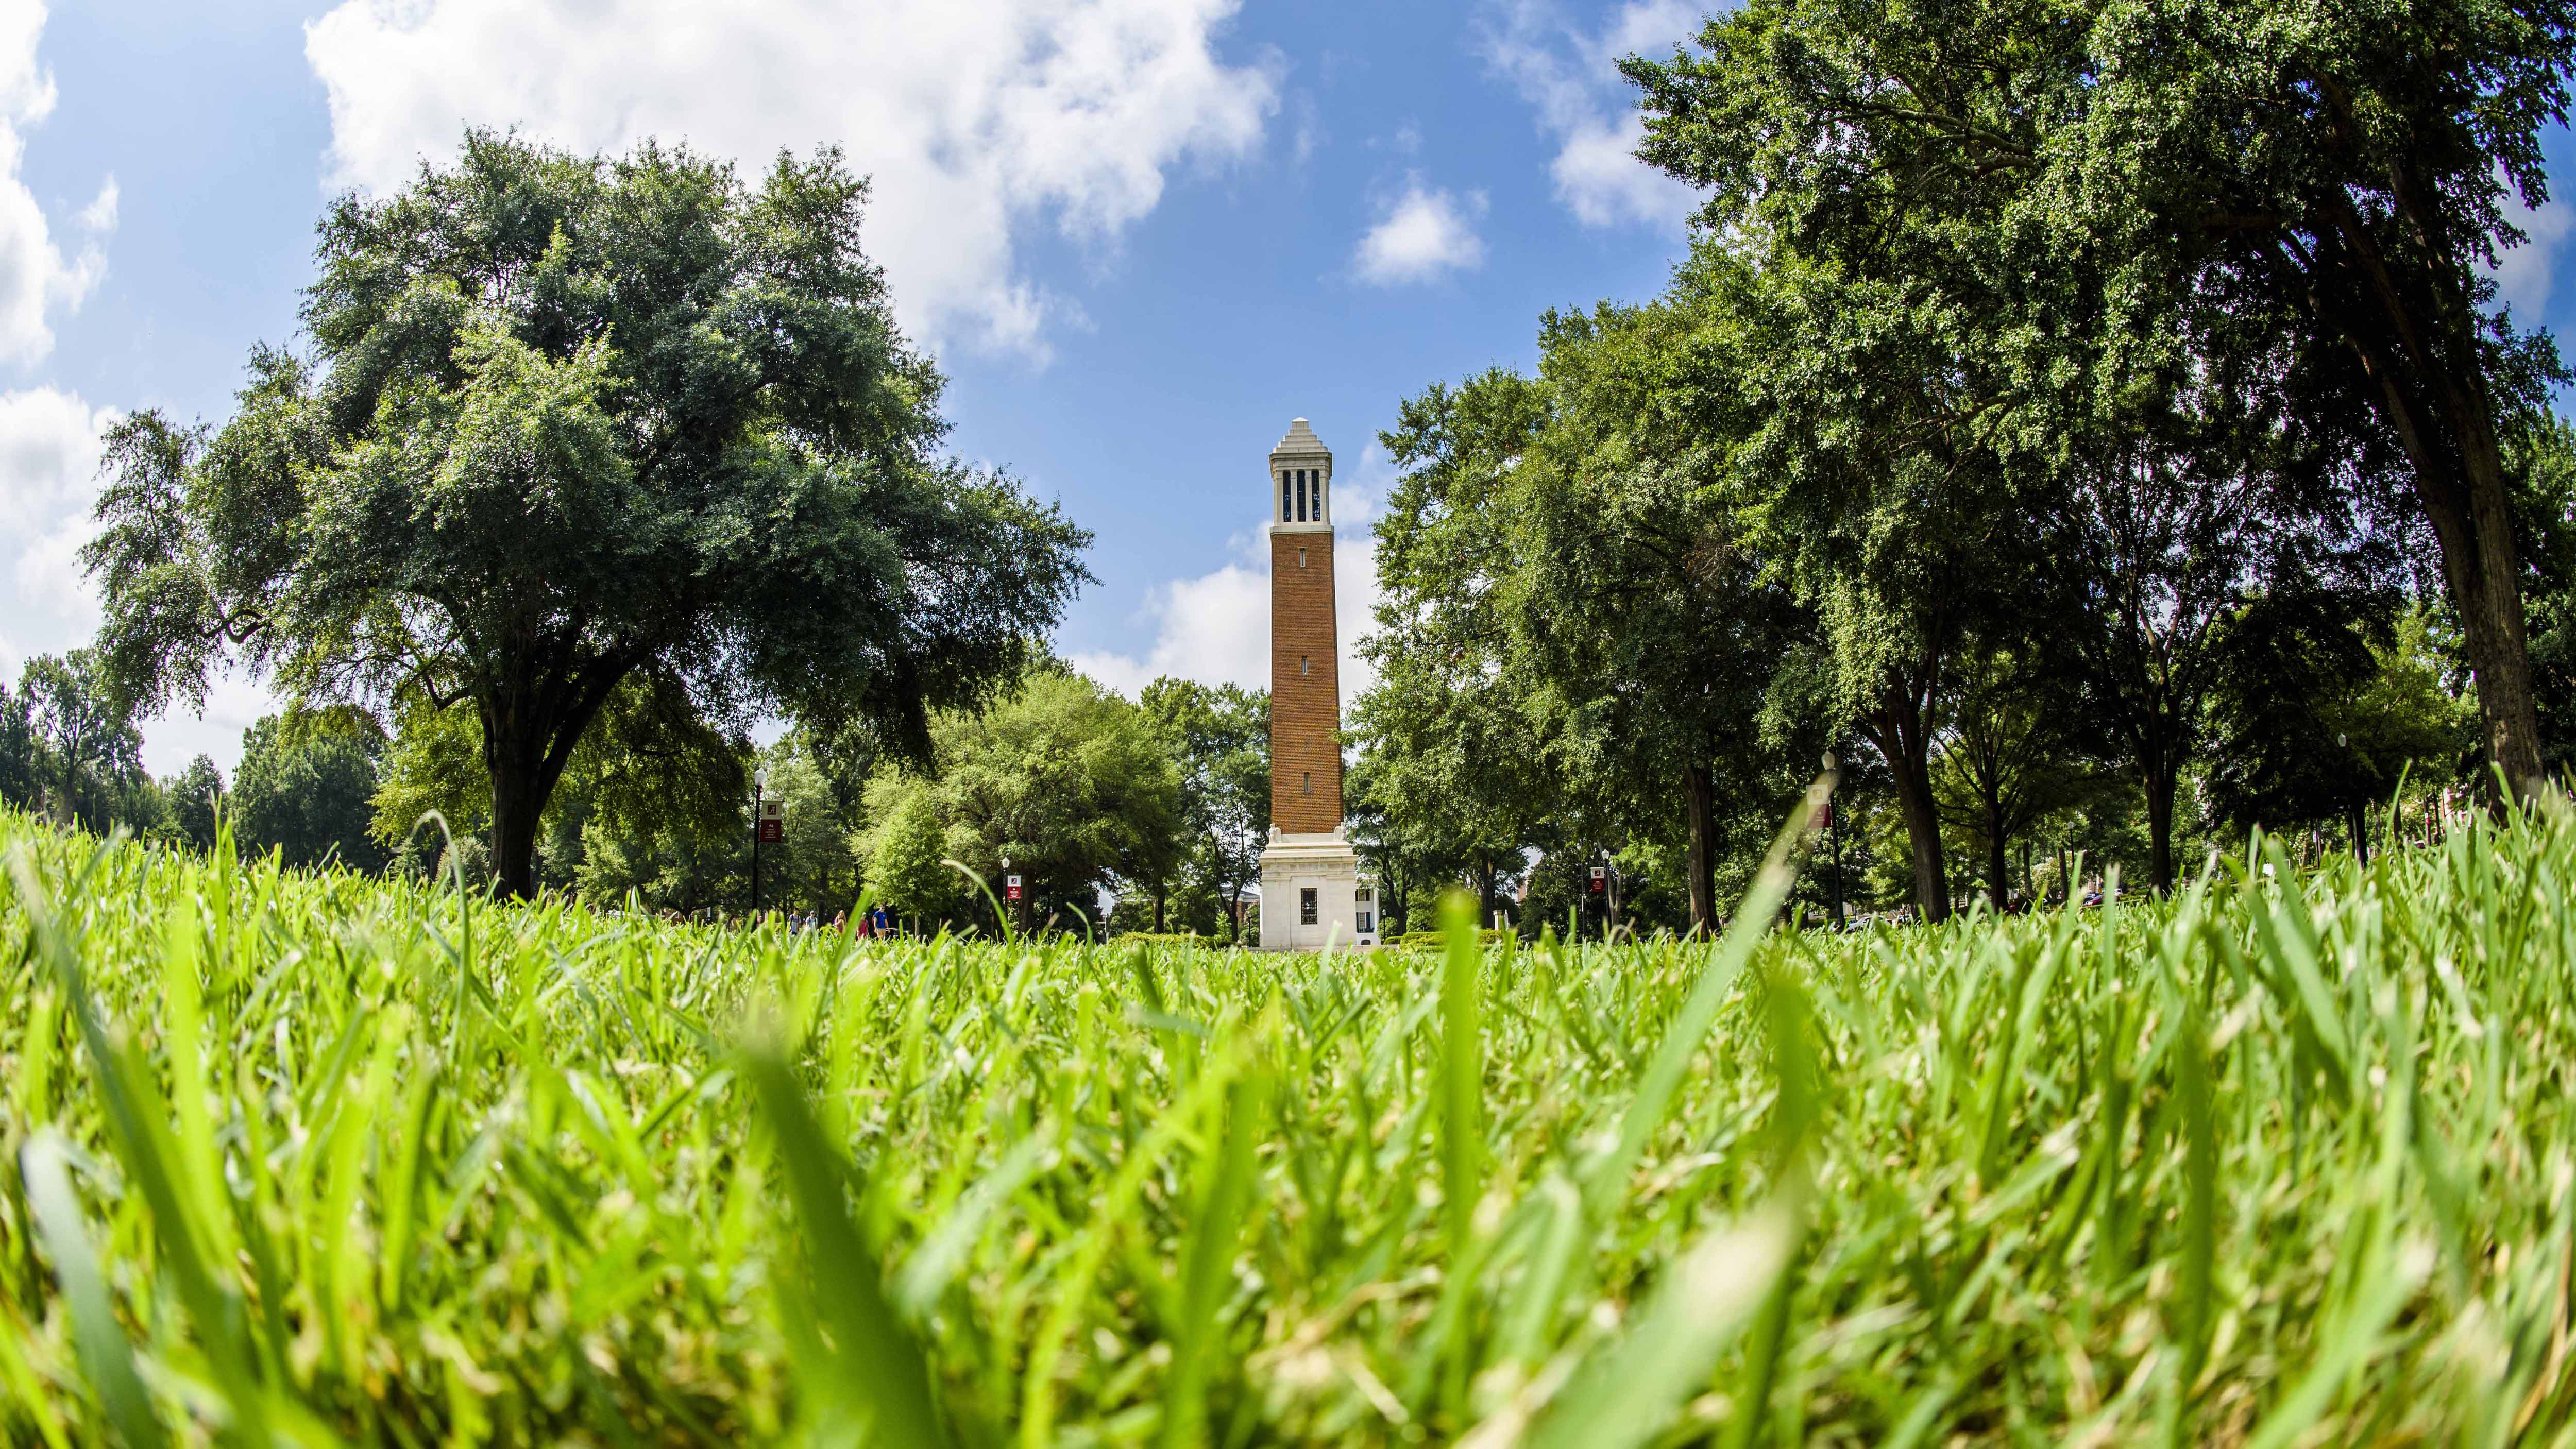 Denny Chimes, perspective is looking up from the ground